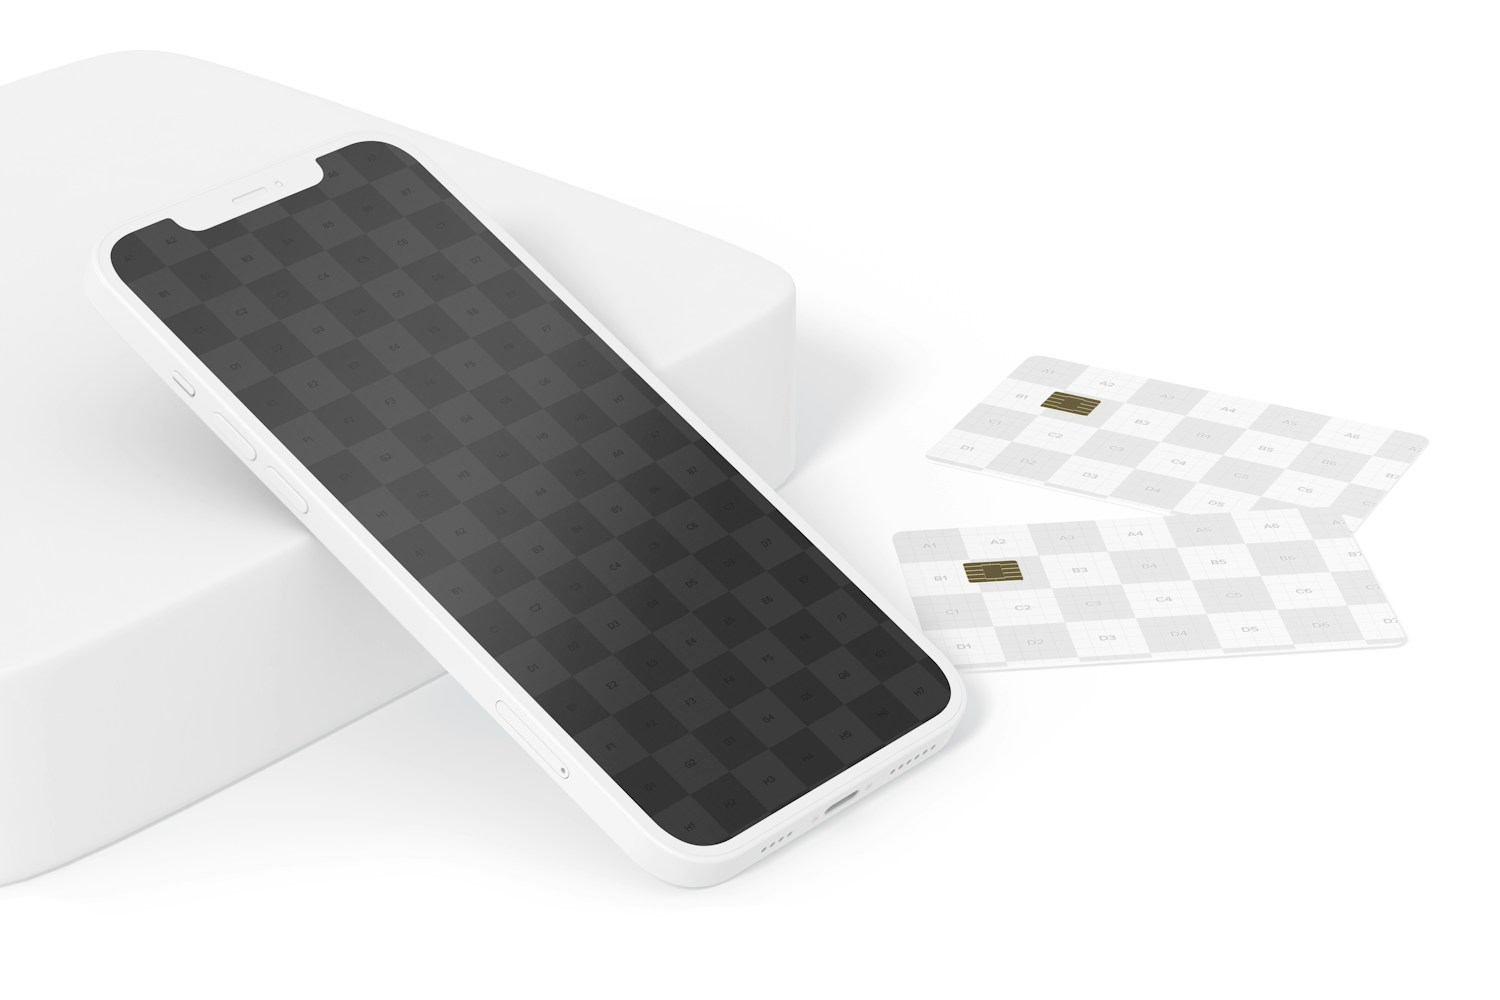 Smartphone with Credit Card Mockup, Perspective